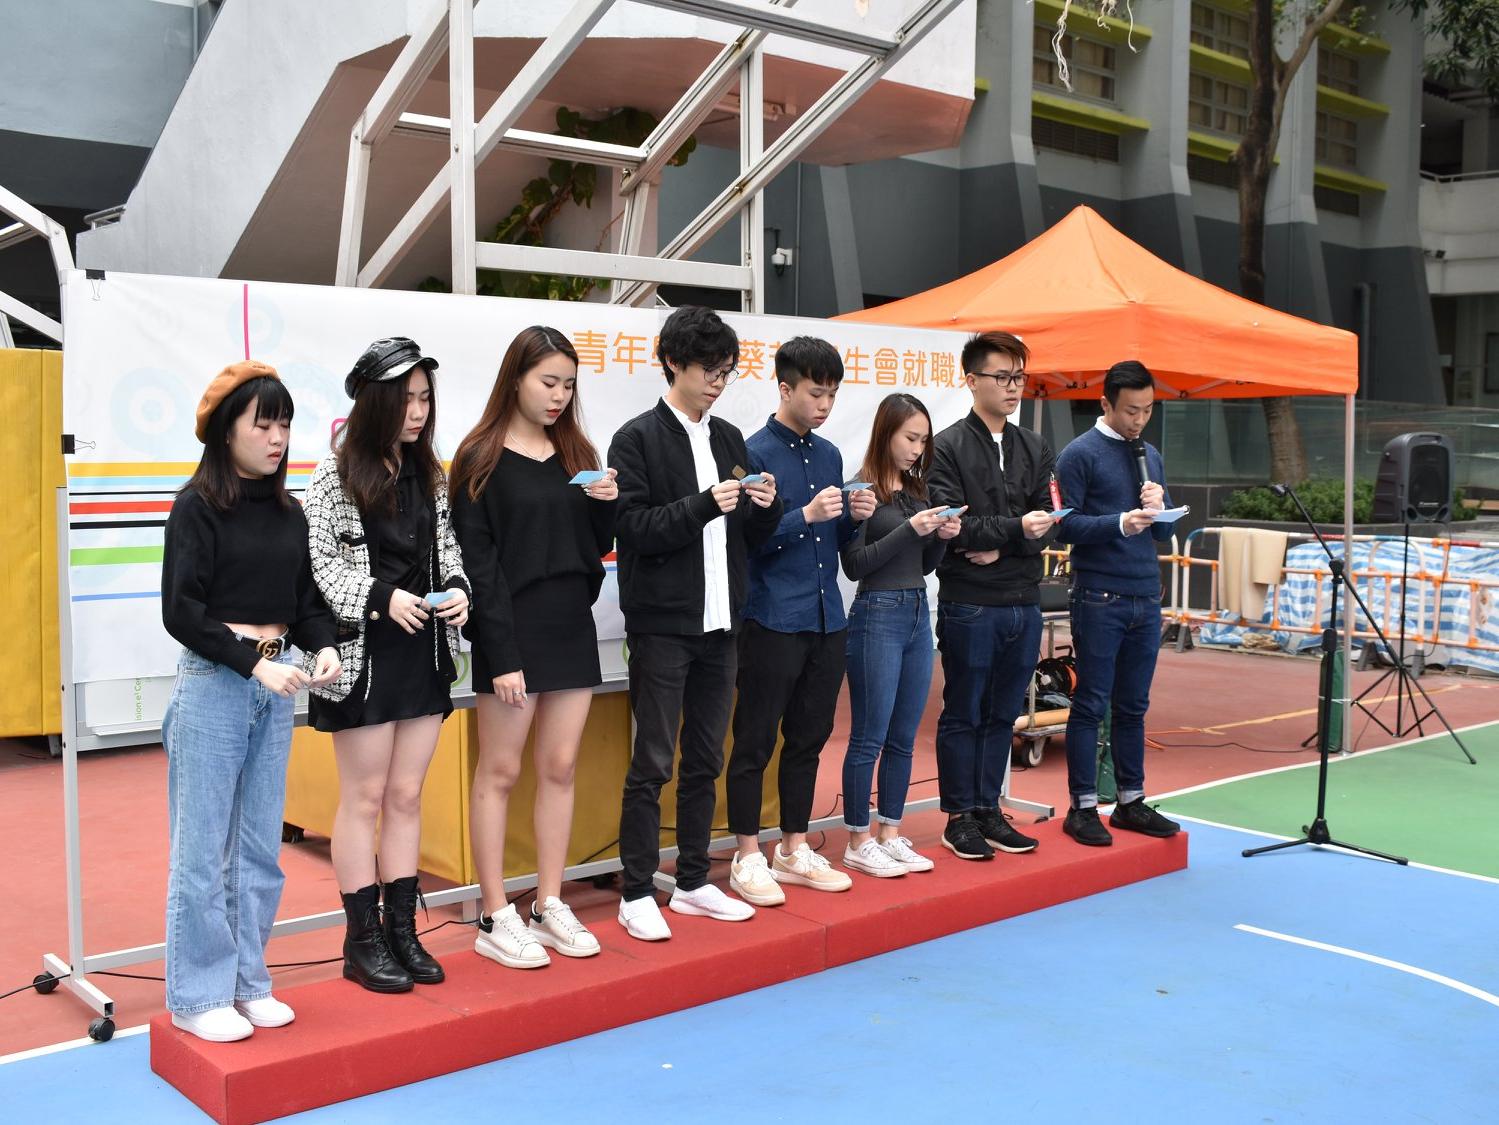 Business students participated in Student Union Inauguration Ceremony.